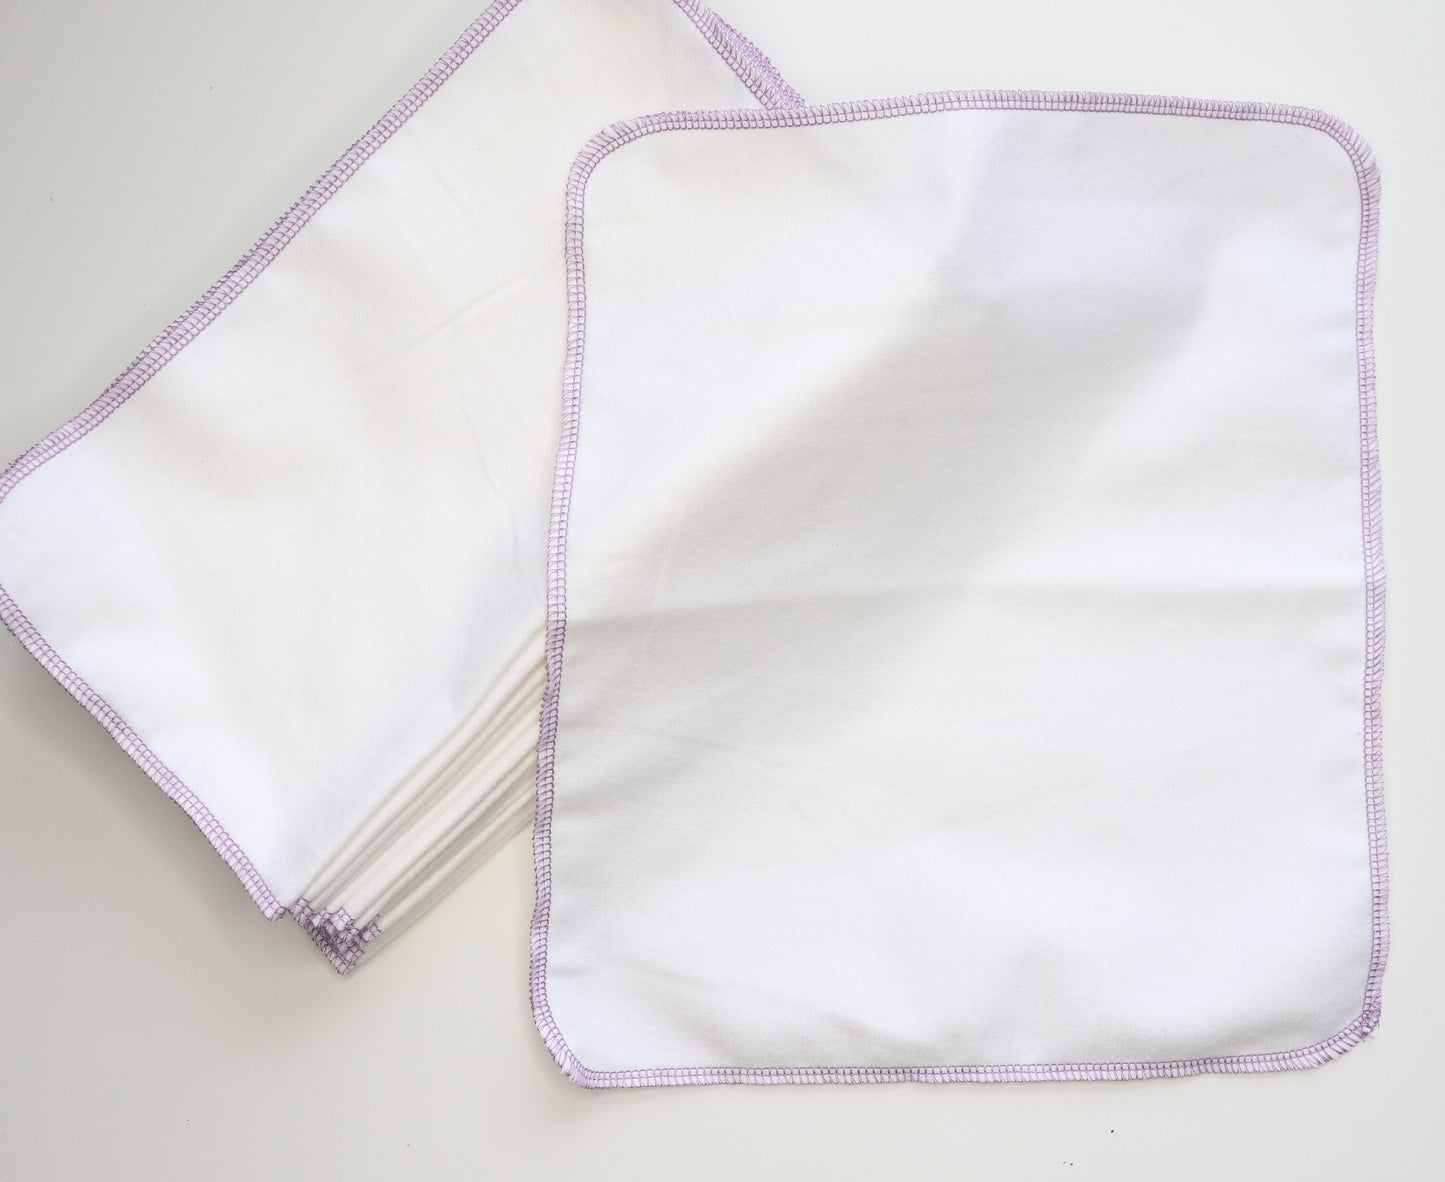 Solid white reusable NonPaper Towels. Stitched on the outside with a lilac purple thread.